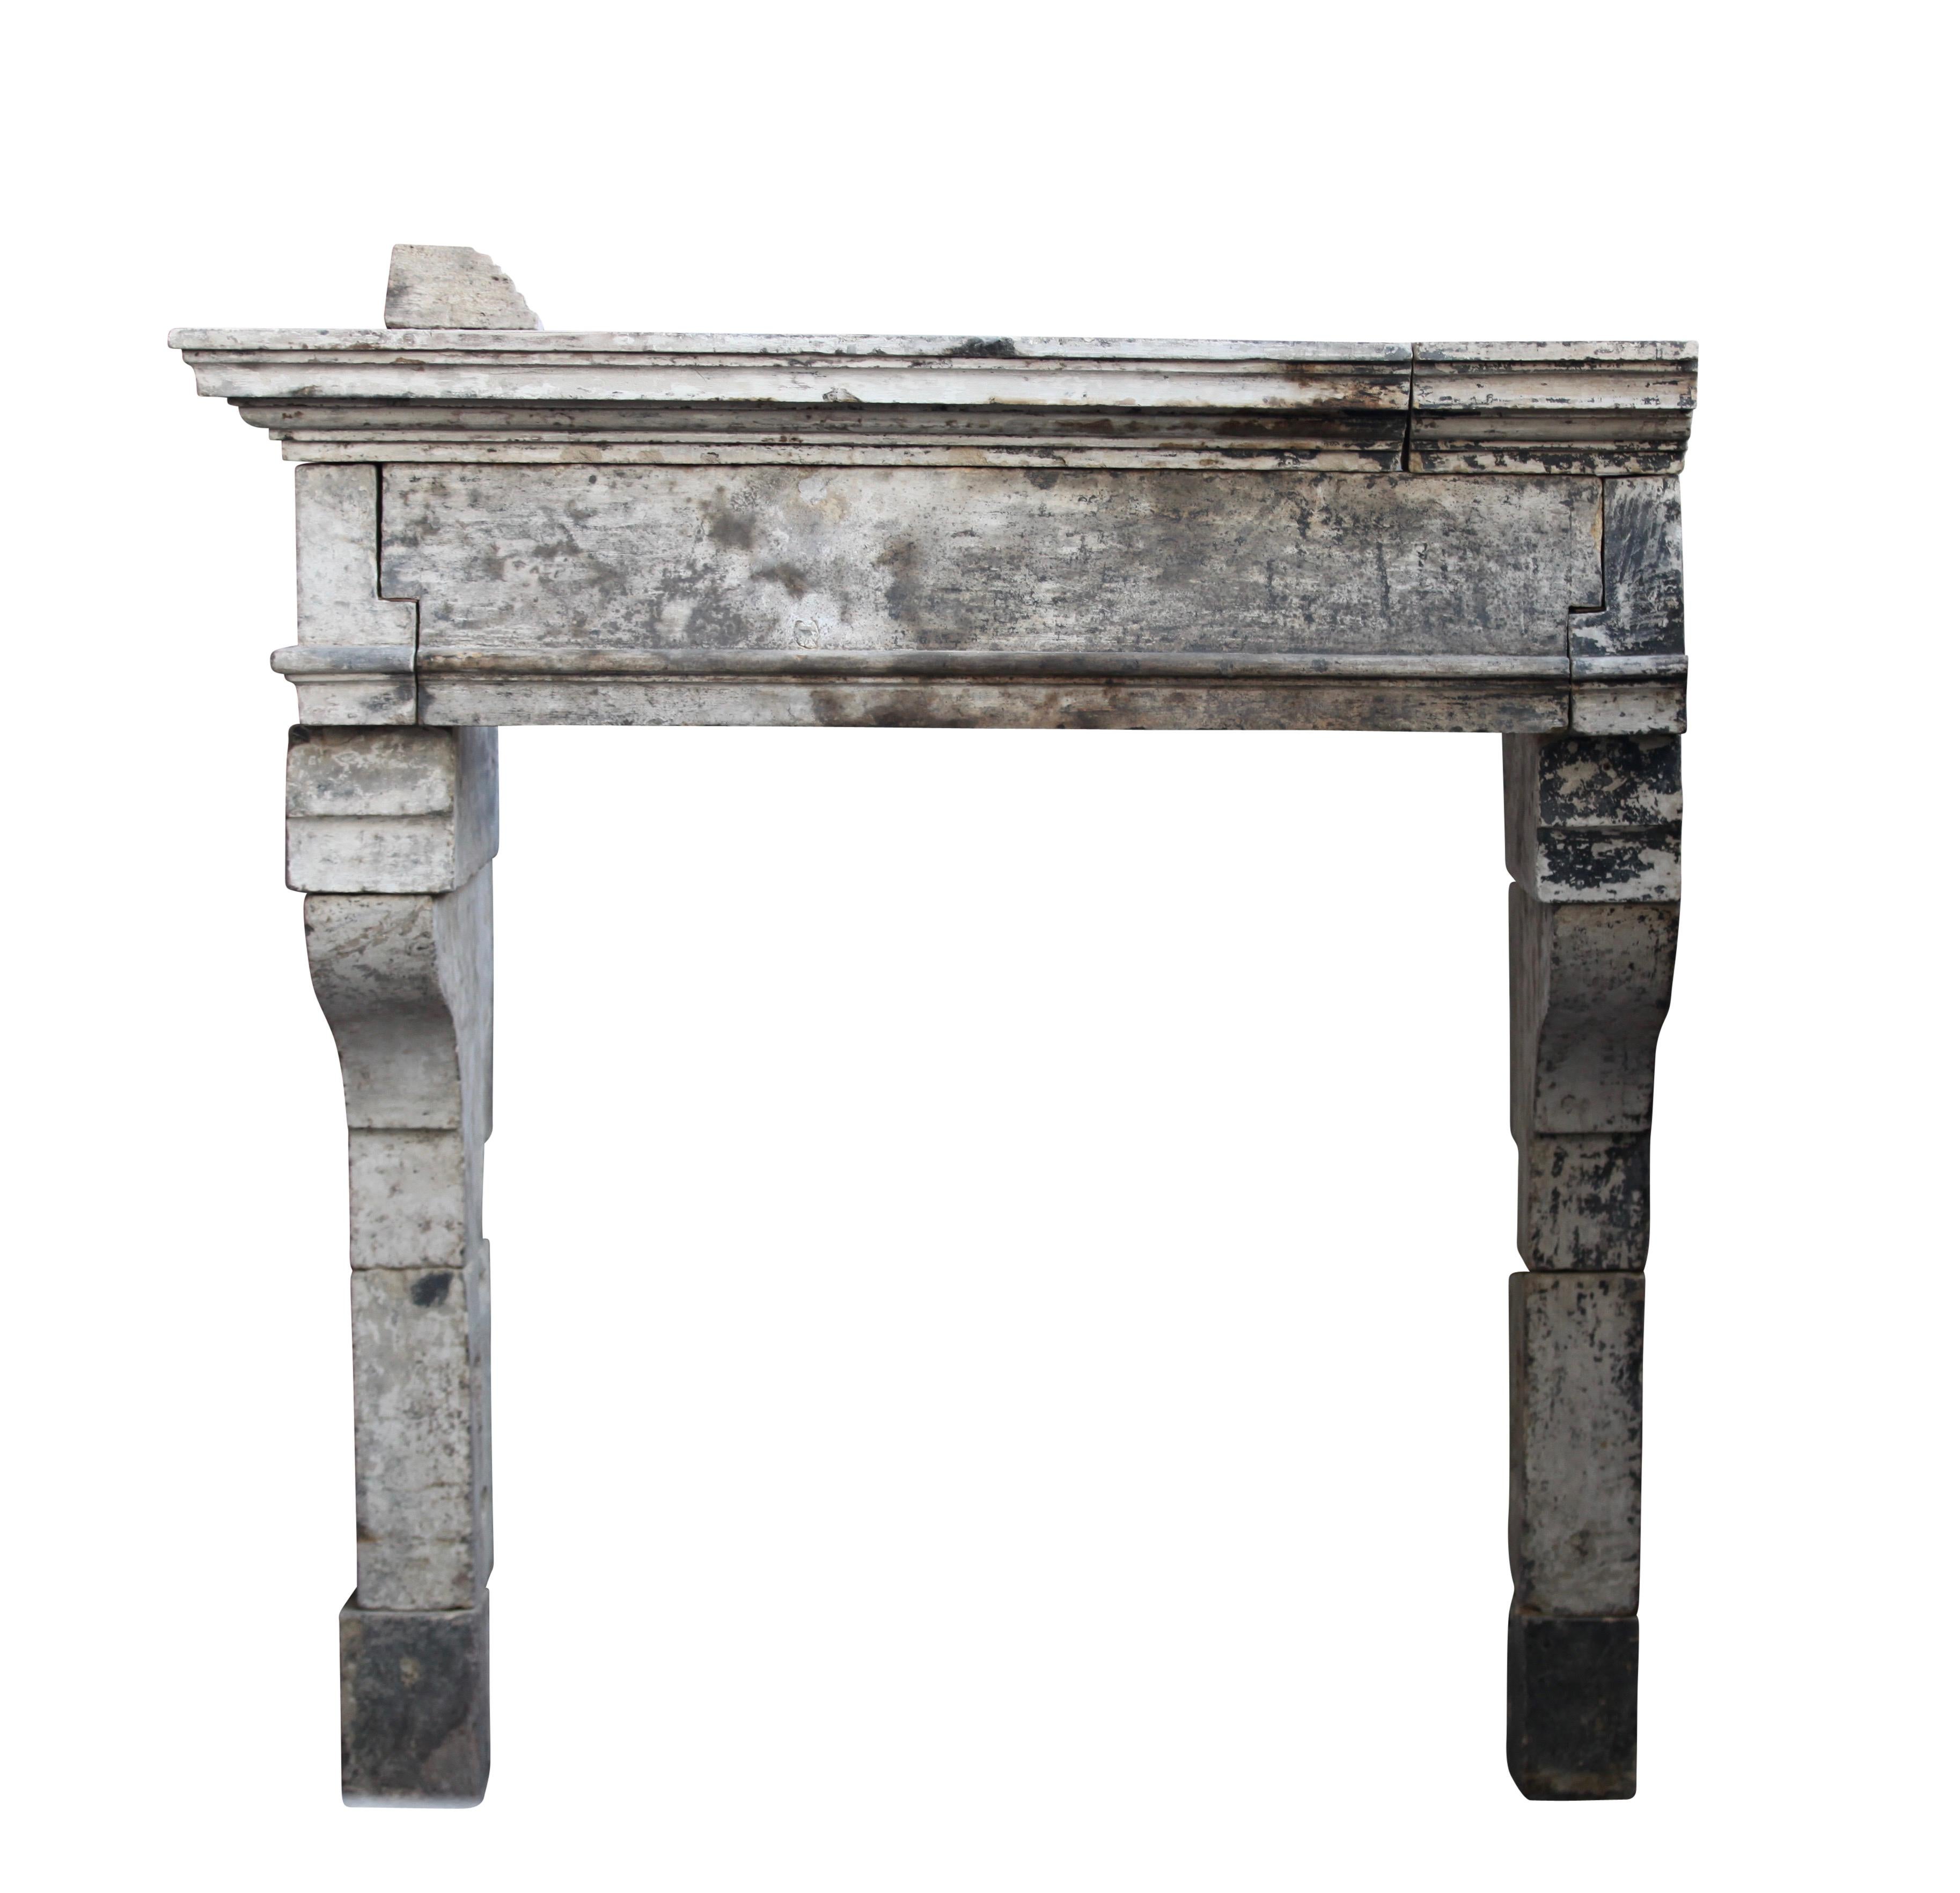 This is a French Country side LXIII period limestone antique fireplace mantel. This piece was standing against a doorway on the right side.
Shelf can be added on demand. It still has its original patina on the mantel.
Measures:
190 cm EW